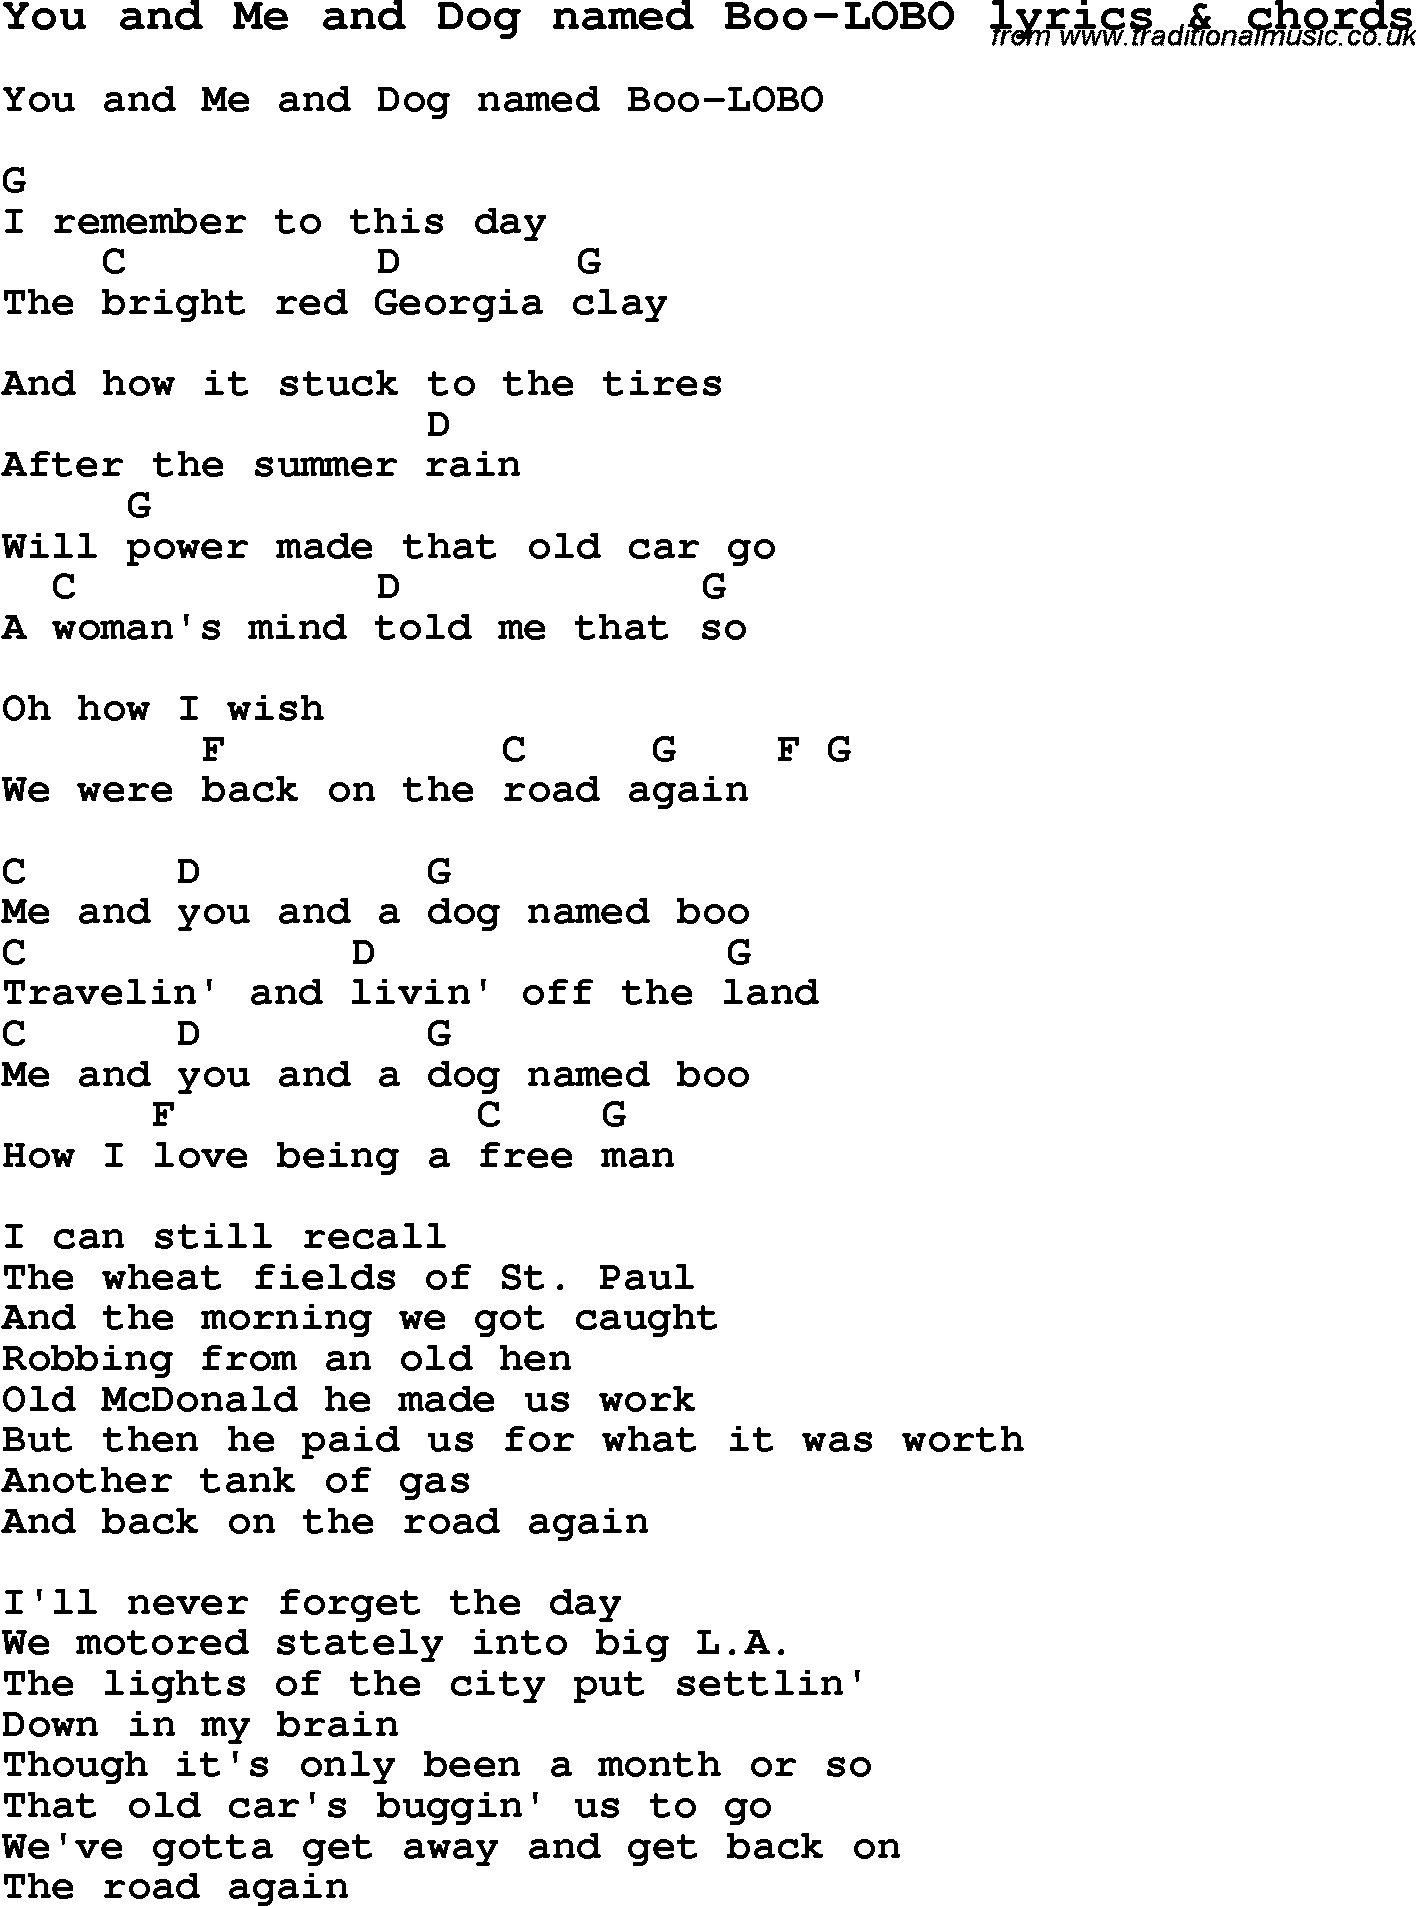 Love Song Lyrics for: You and Me and Dog named Boo-LOBO with chords for Ukulele, Guitar Banjo etc.